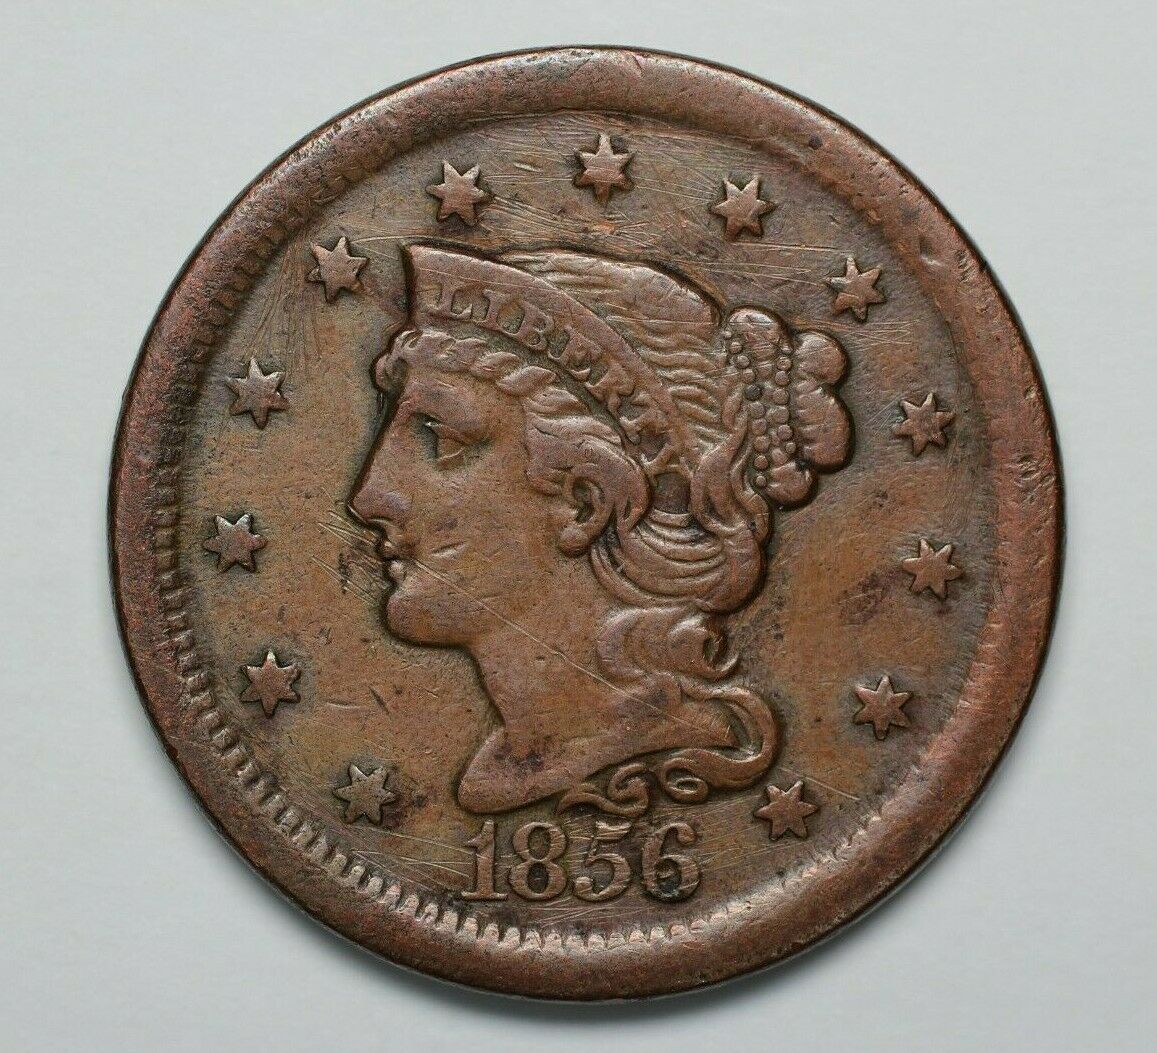 1856 Braided Large Cent - 183467a